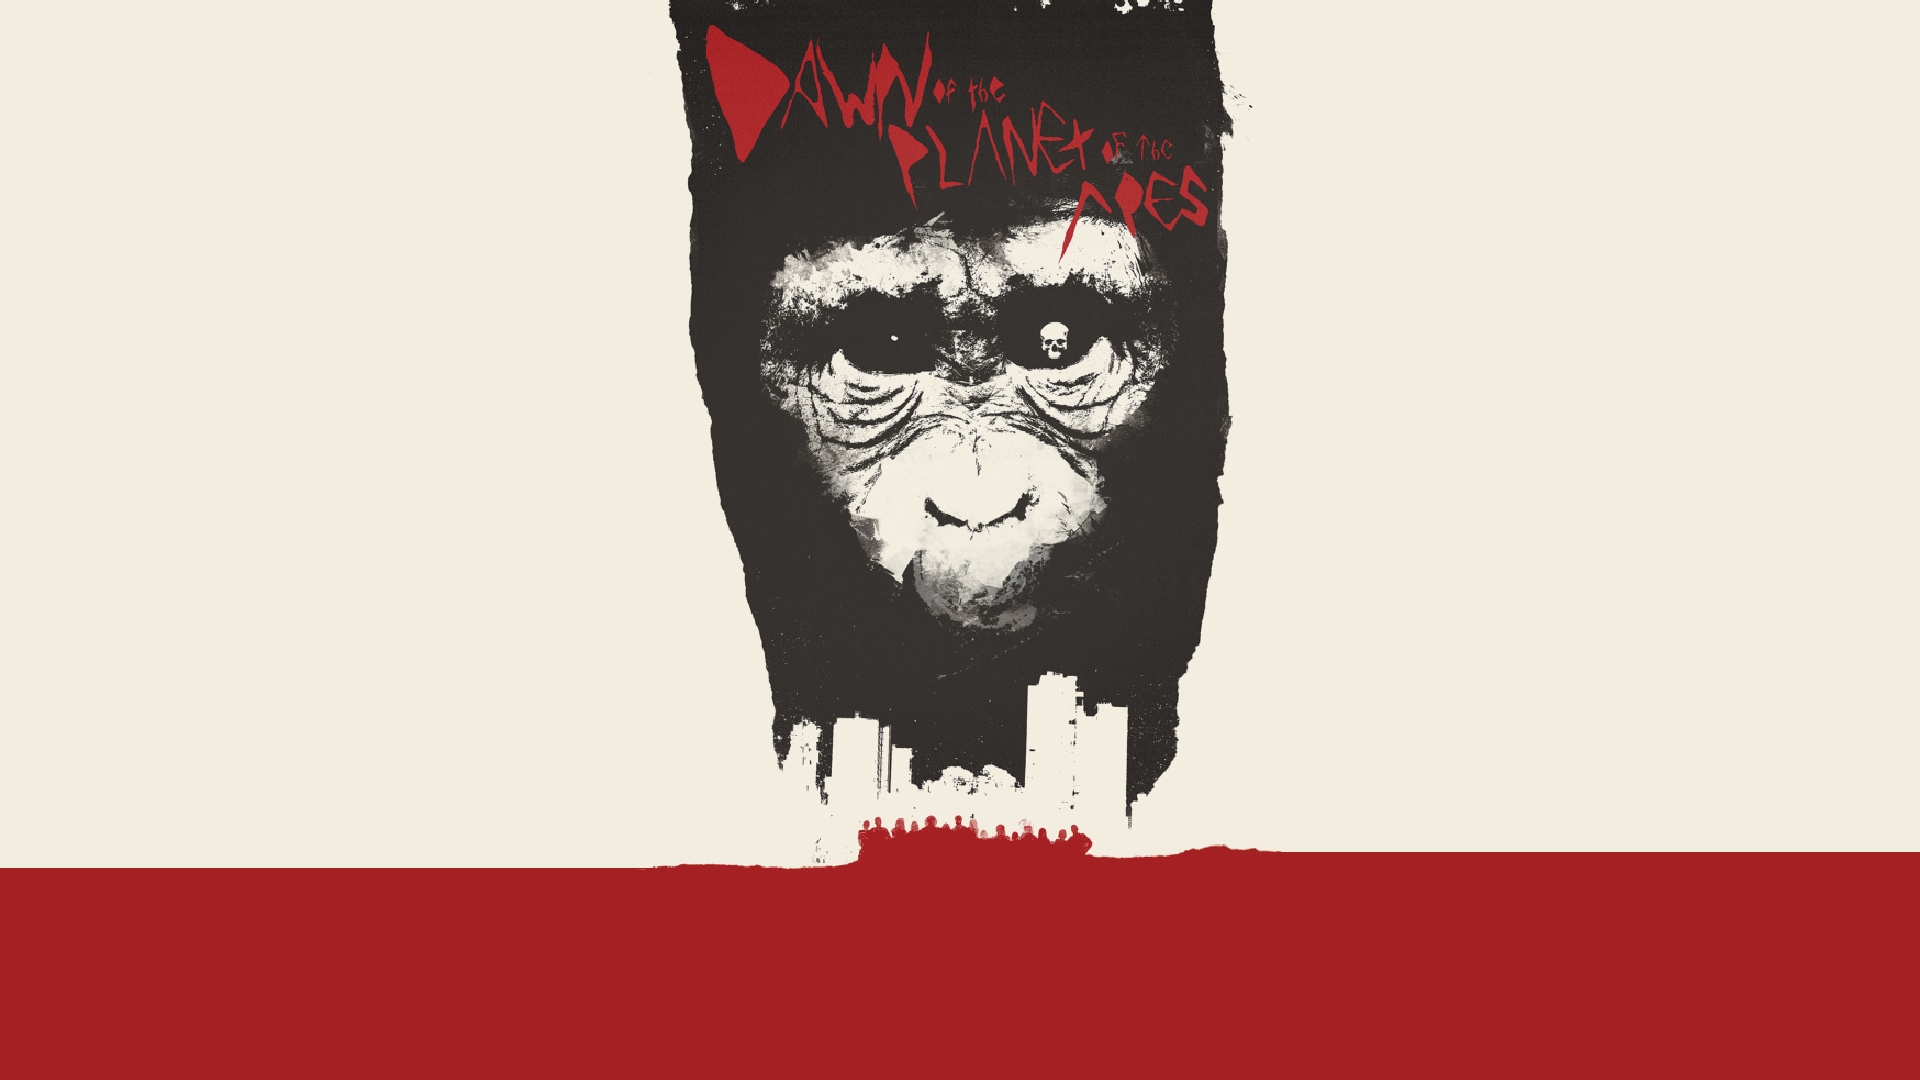 comics, dawn of the planet of the apes, planet of the apes